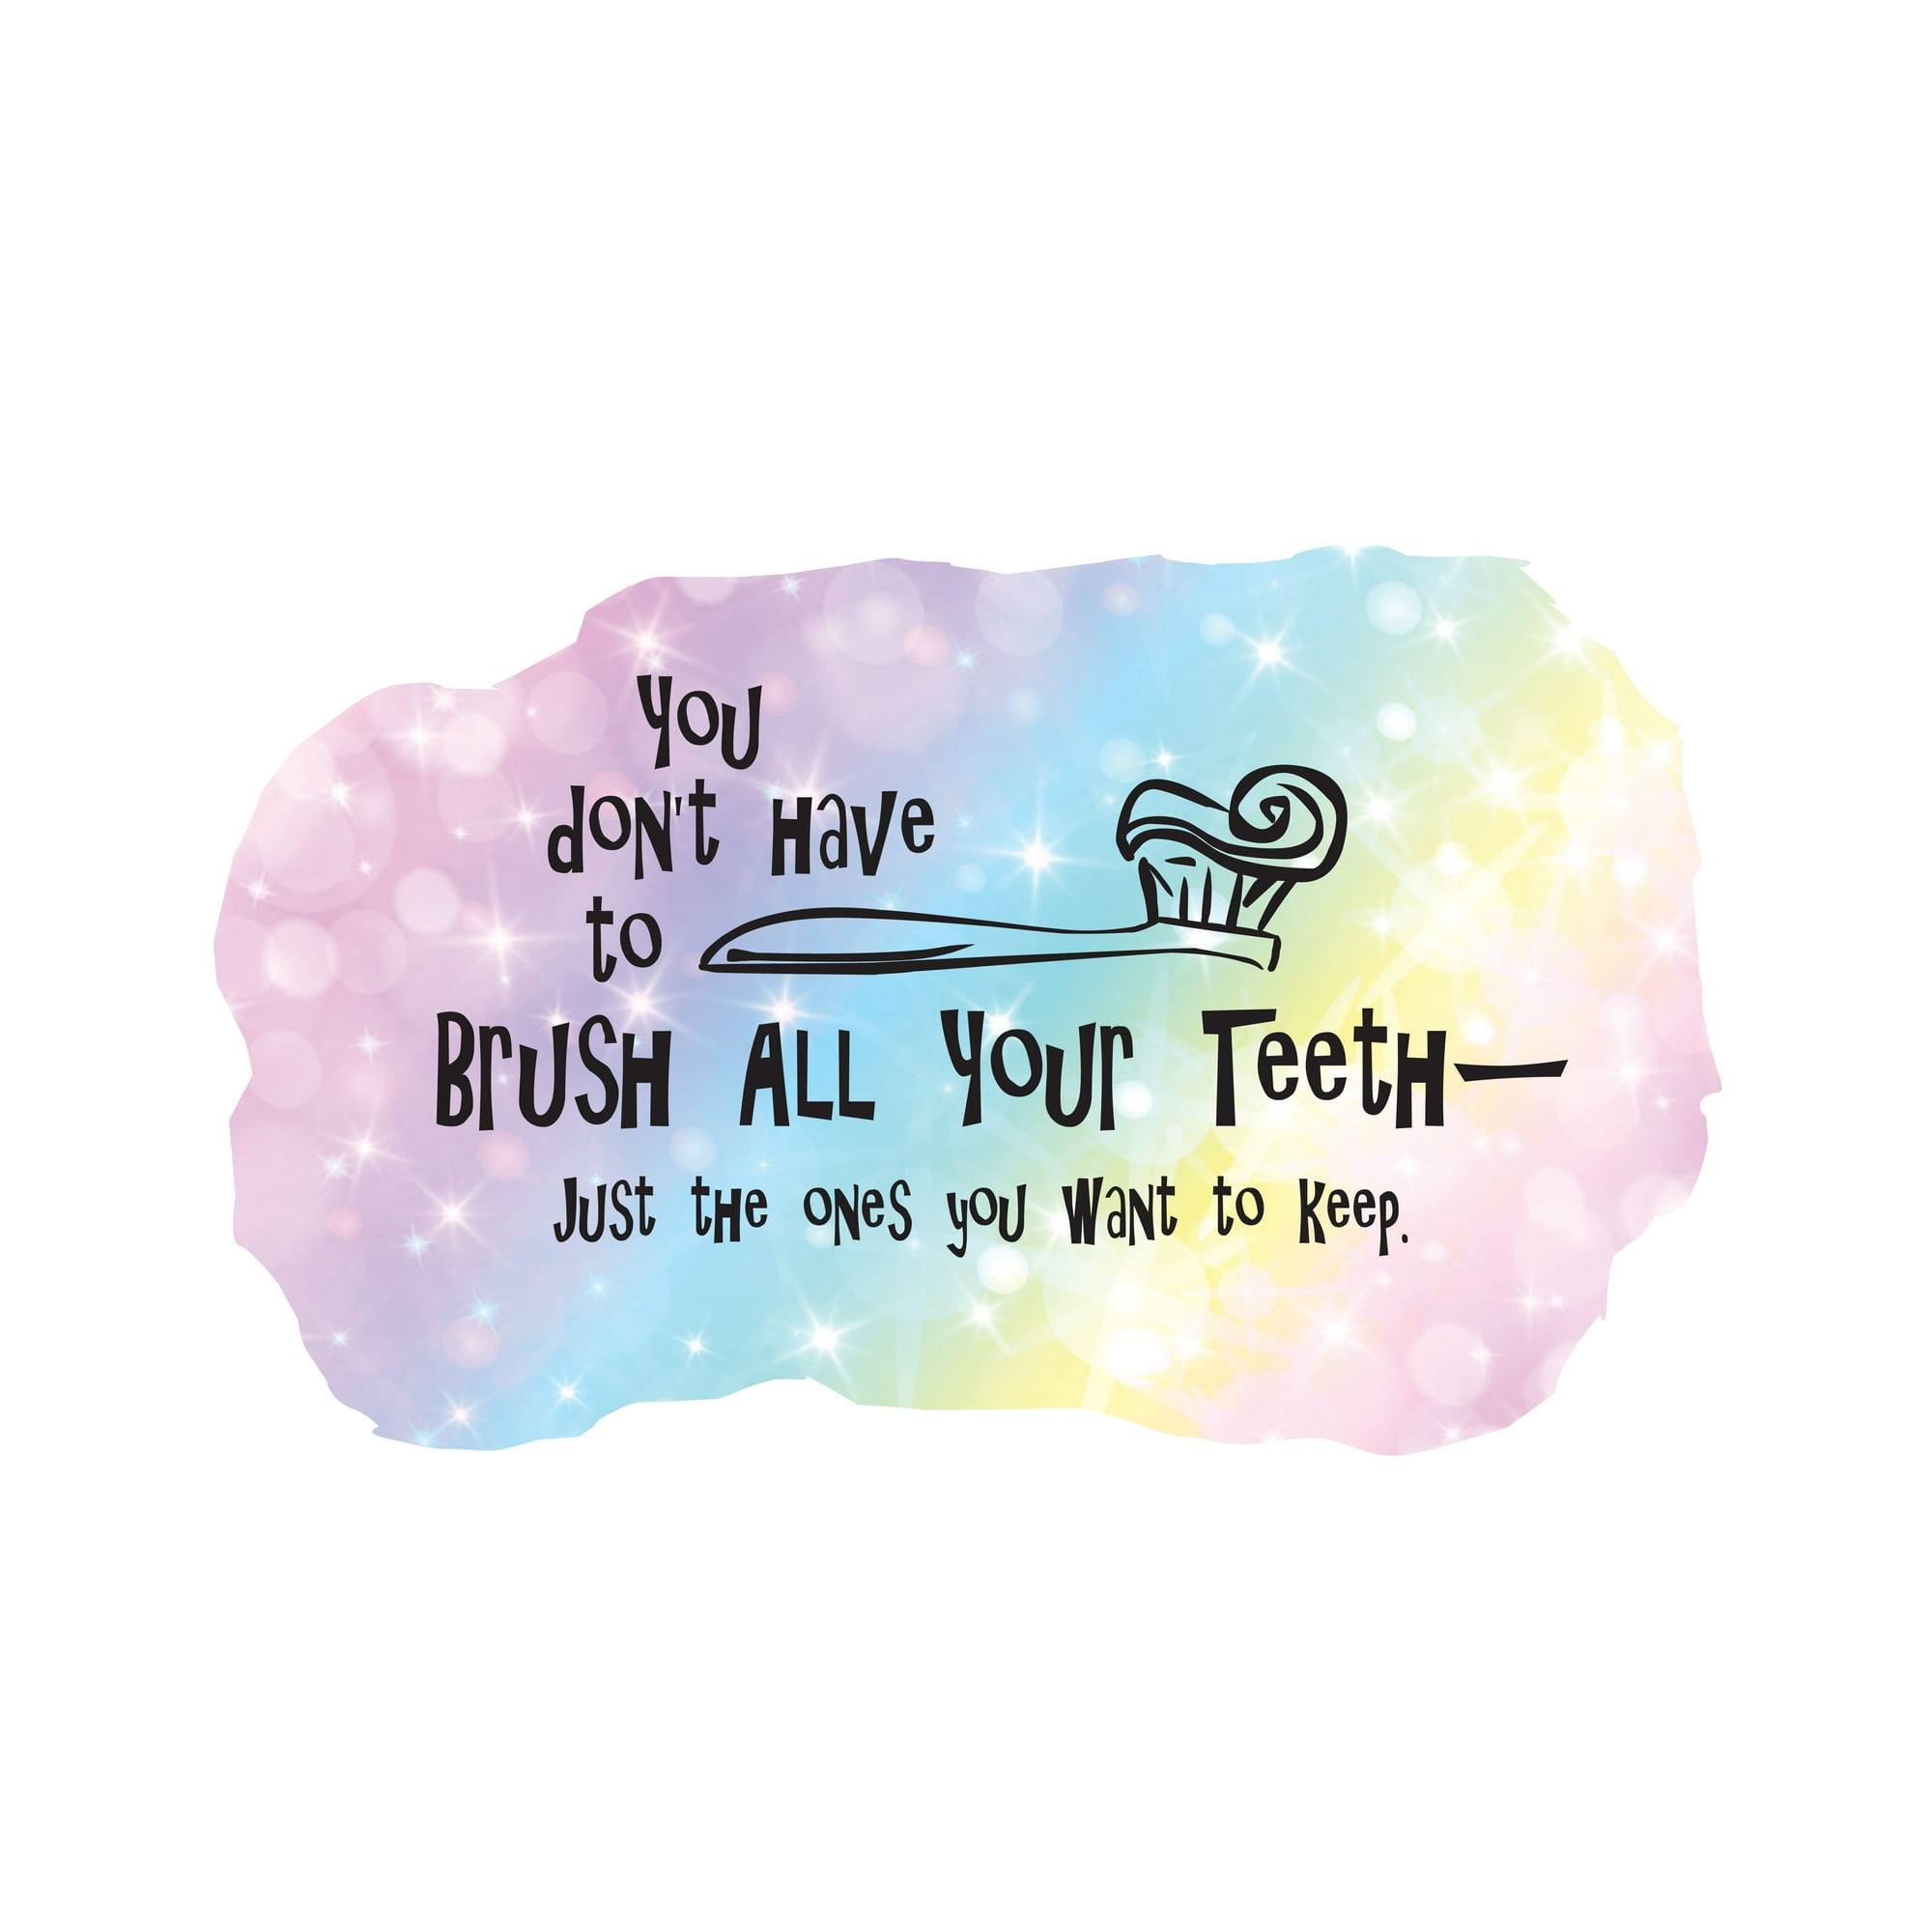 QUOTES - Kids Bathroom Funny Dental Quotes Lettering Art ...